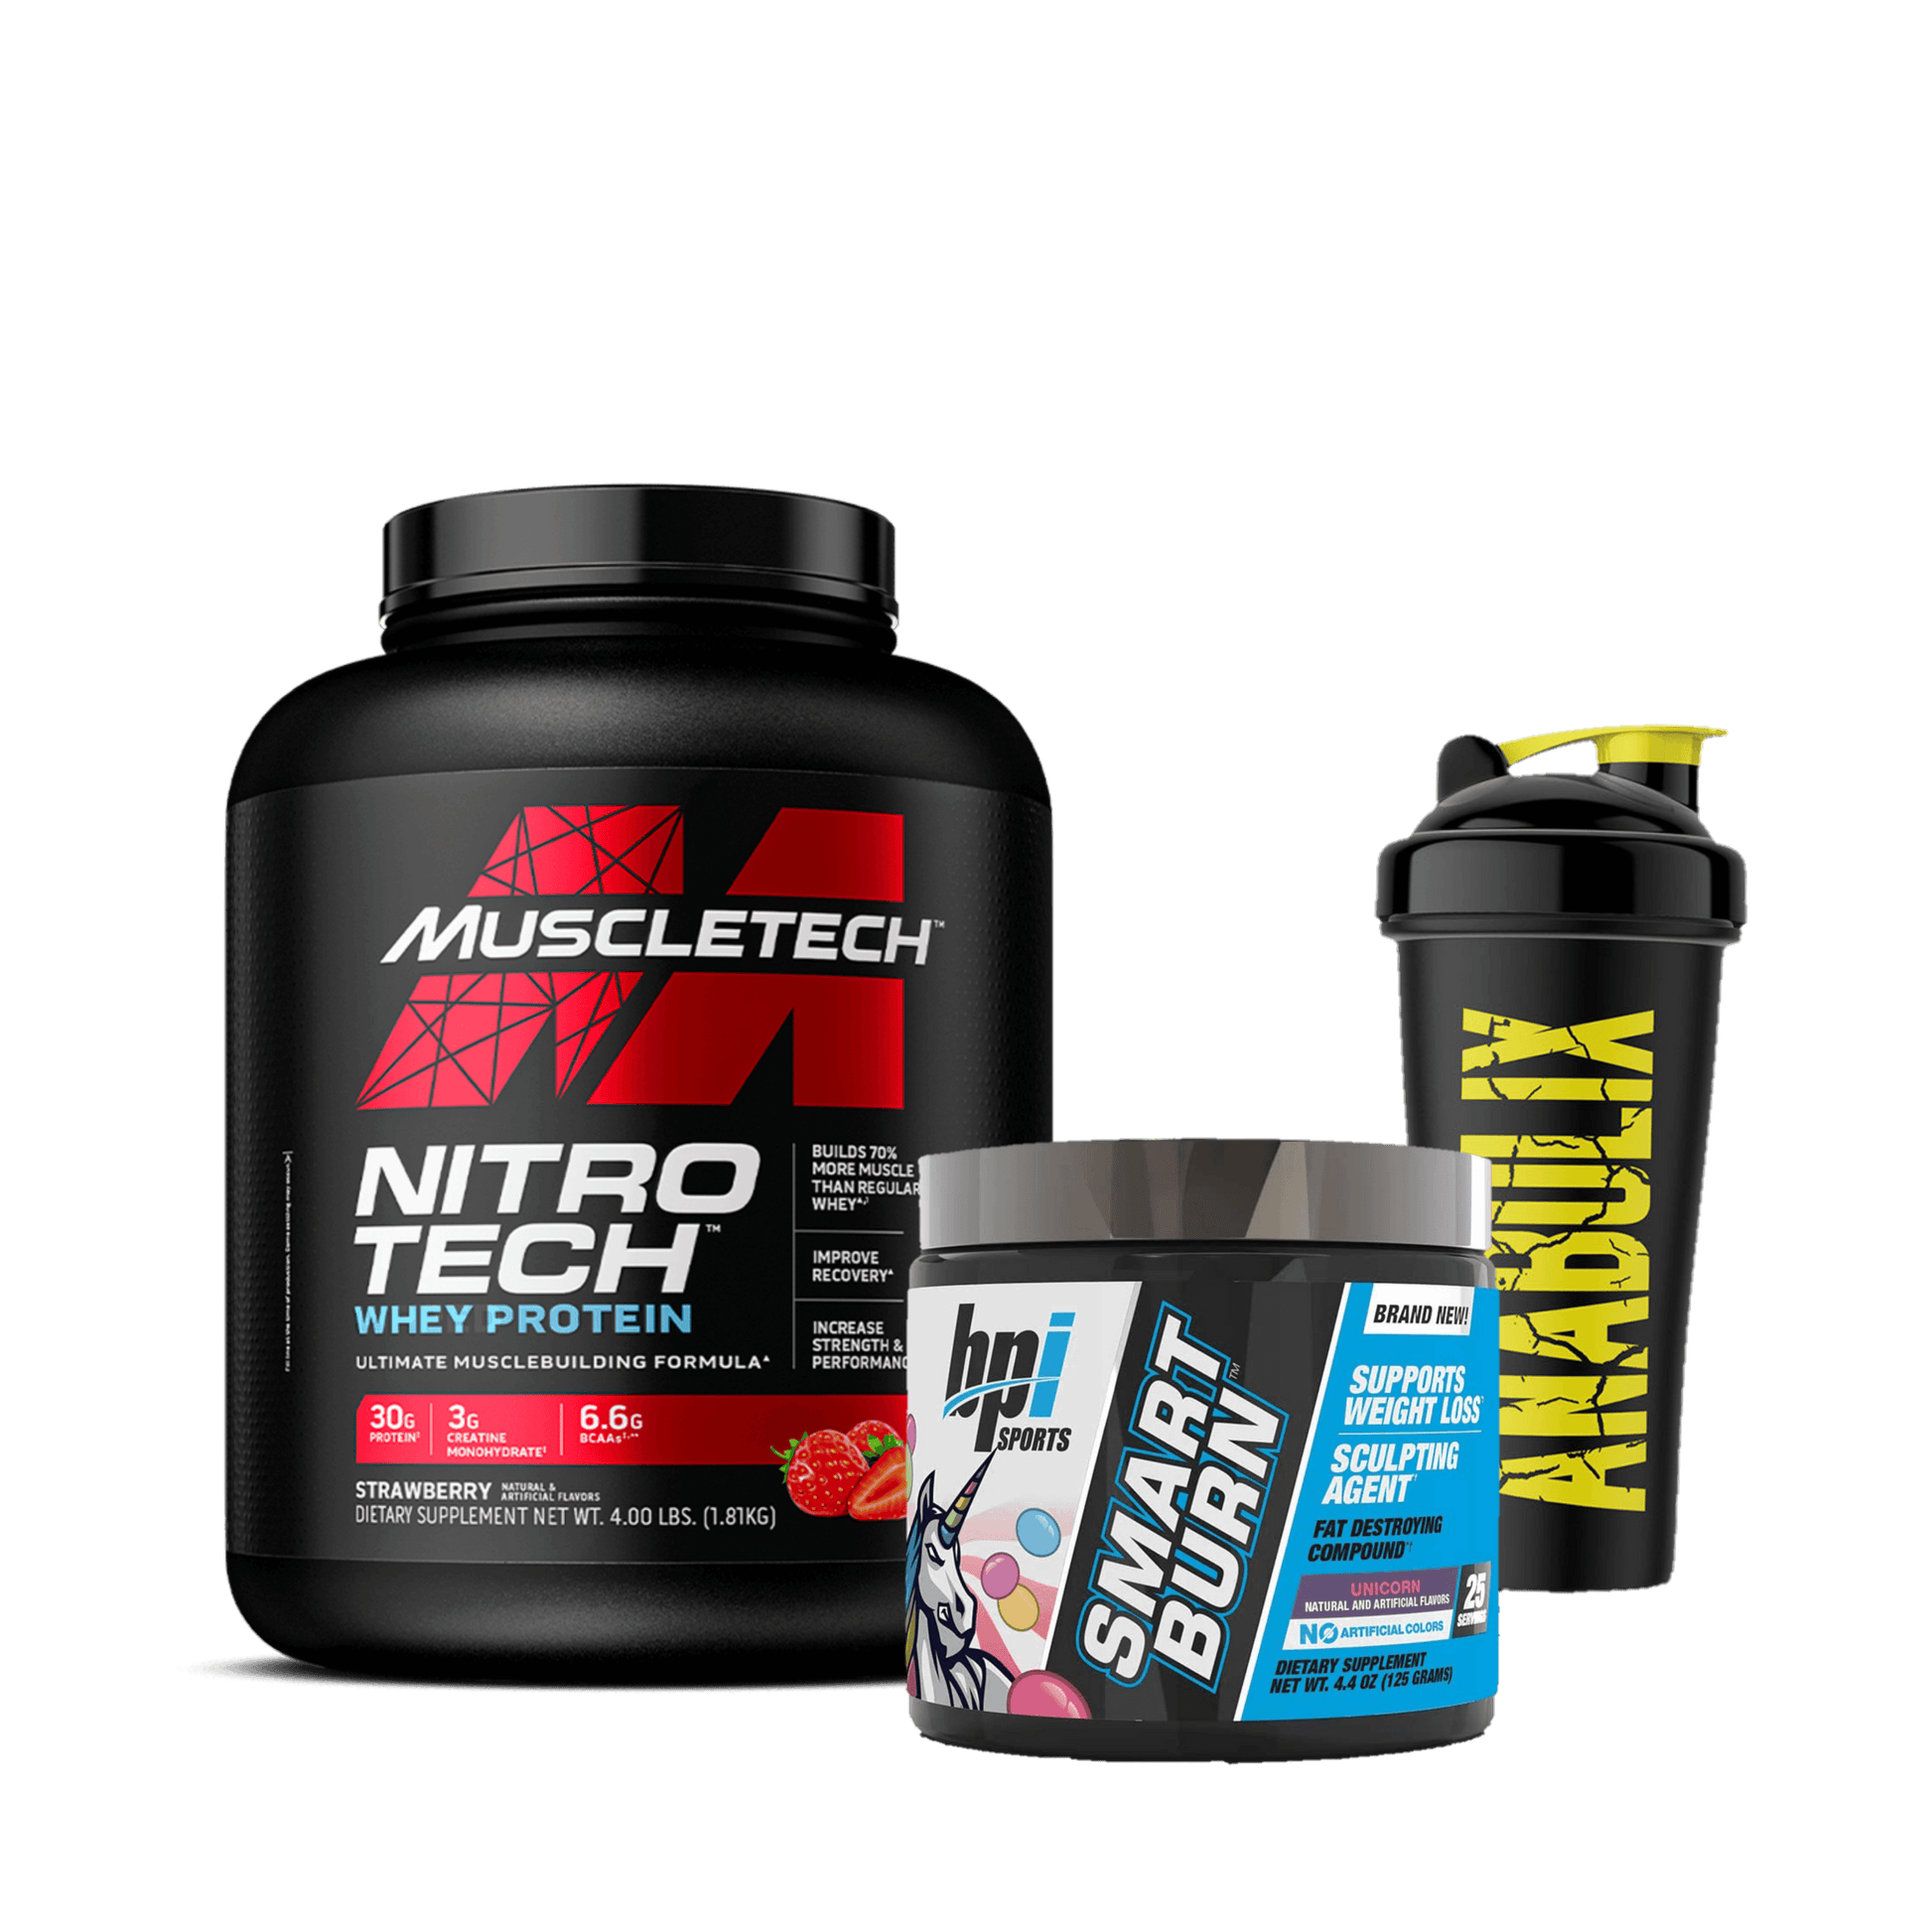 Lets Burn Some Fat ( Nitrotech + Smart burn + Shaker) - The Supplements Factory